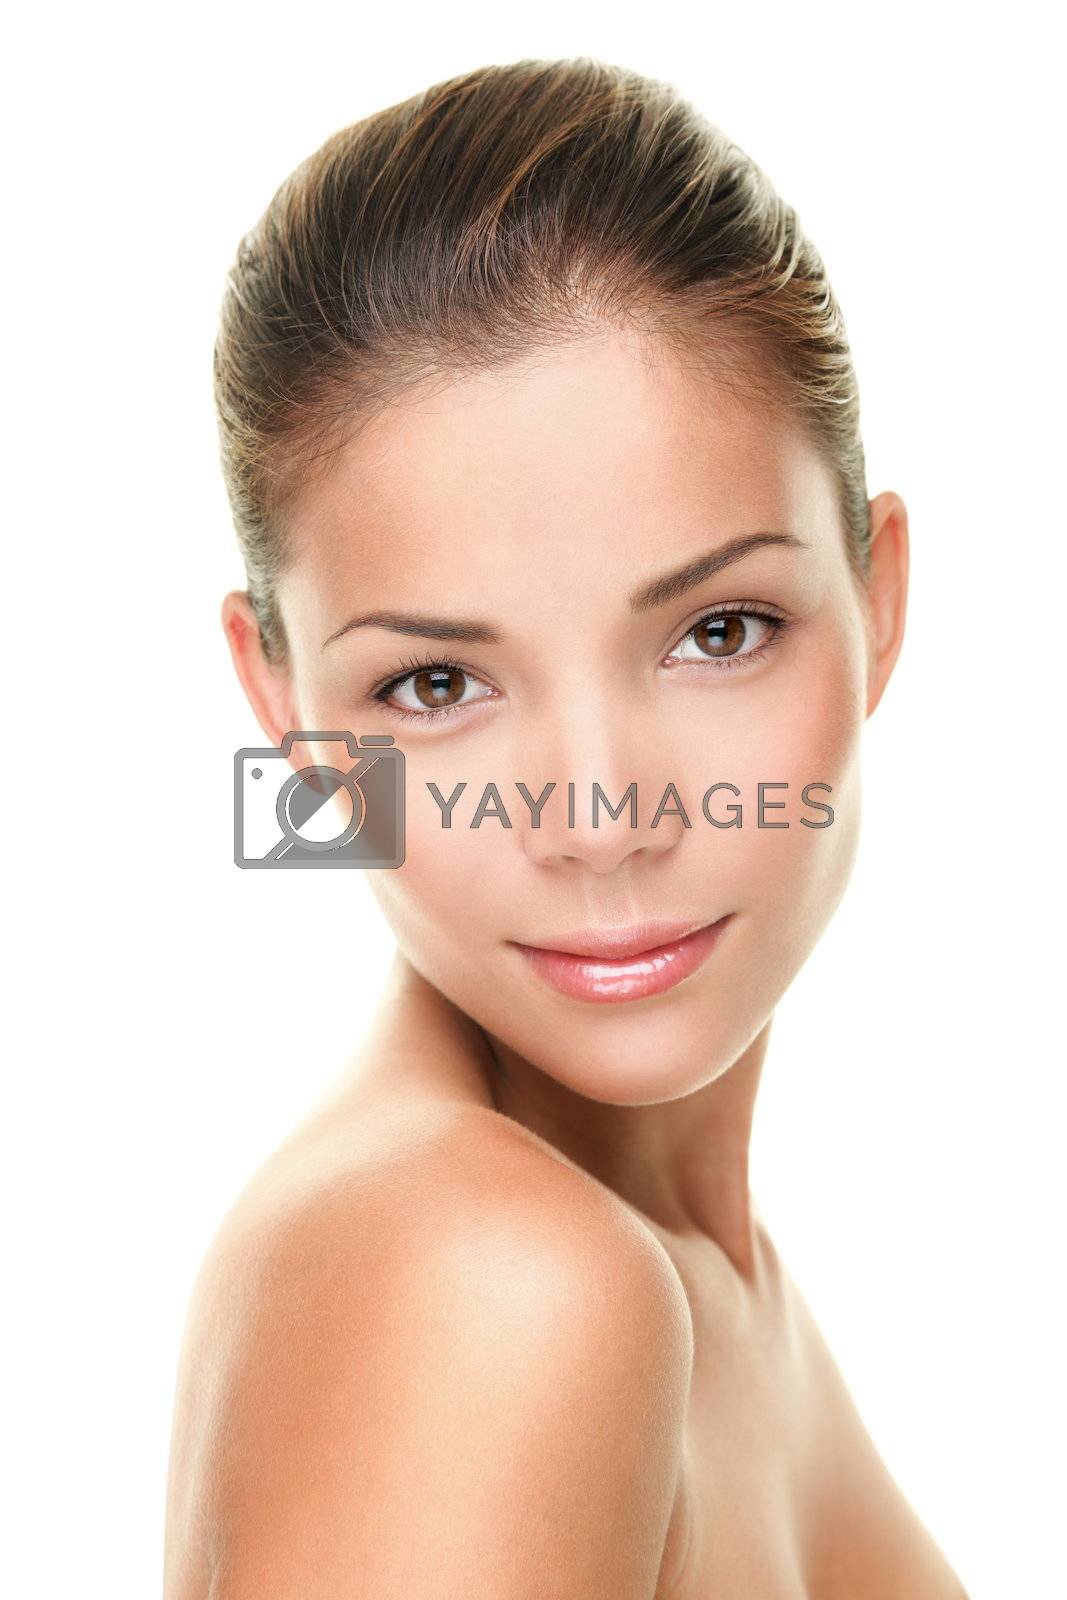 Royalty free image of Beauty skin care face portrait of asian woman by Ariwasabi